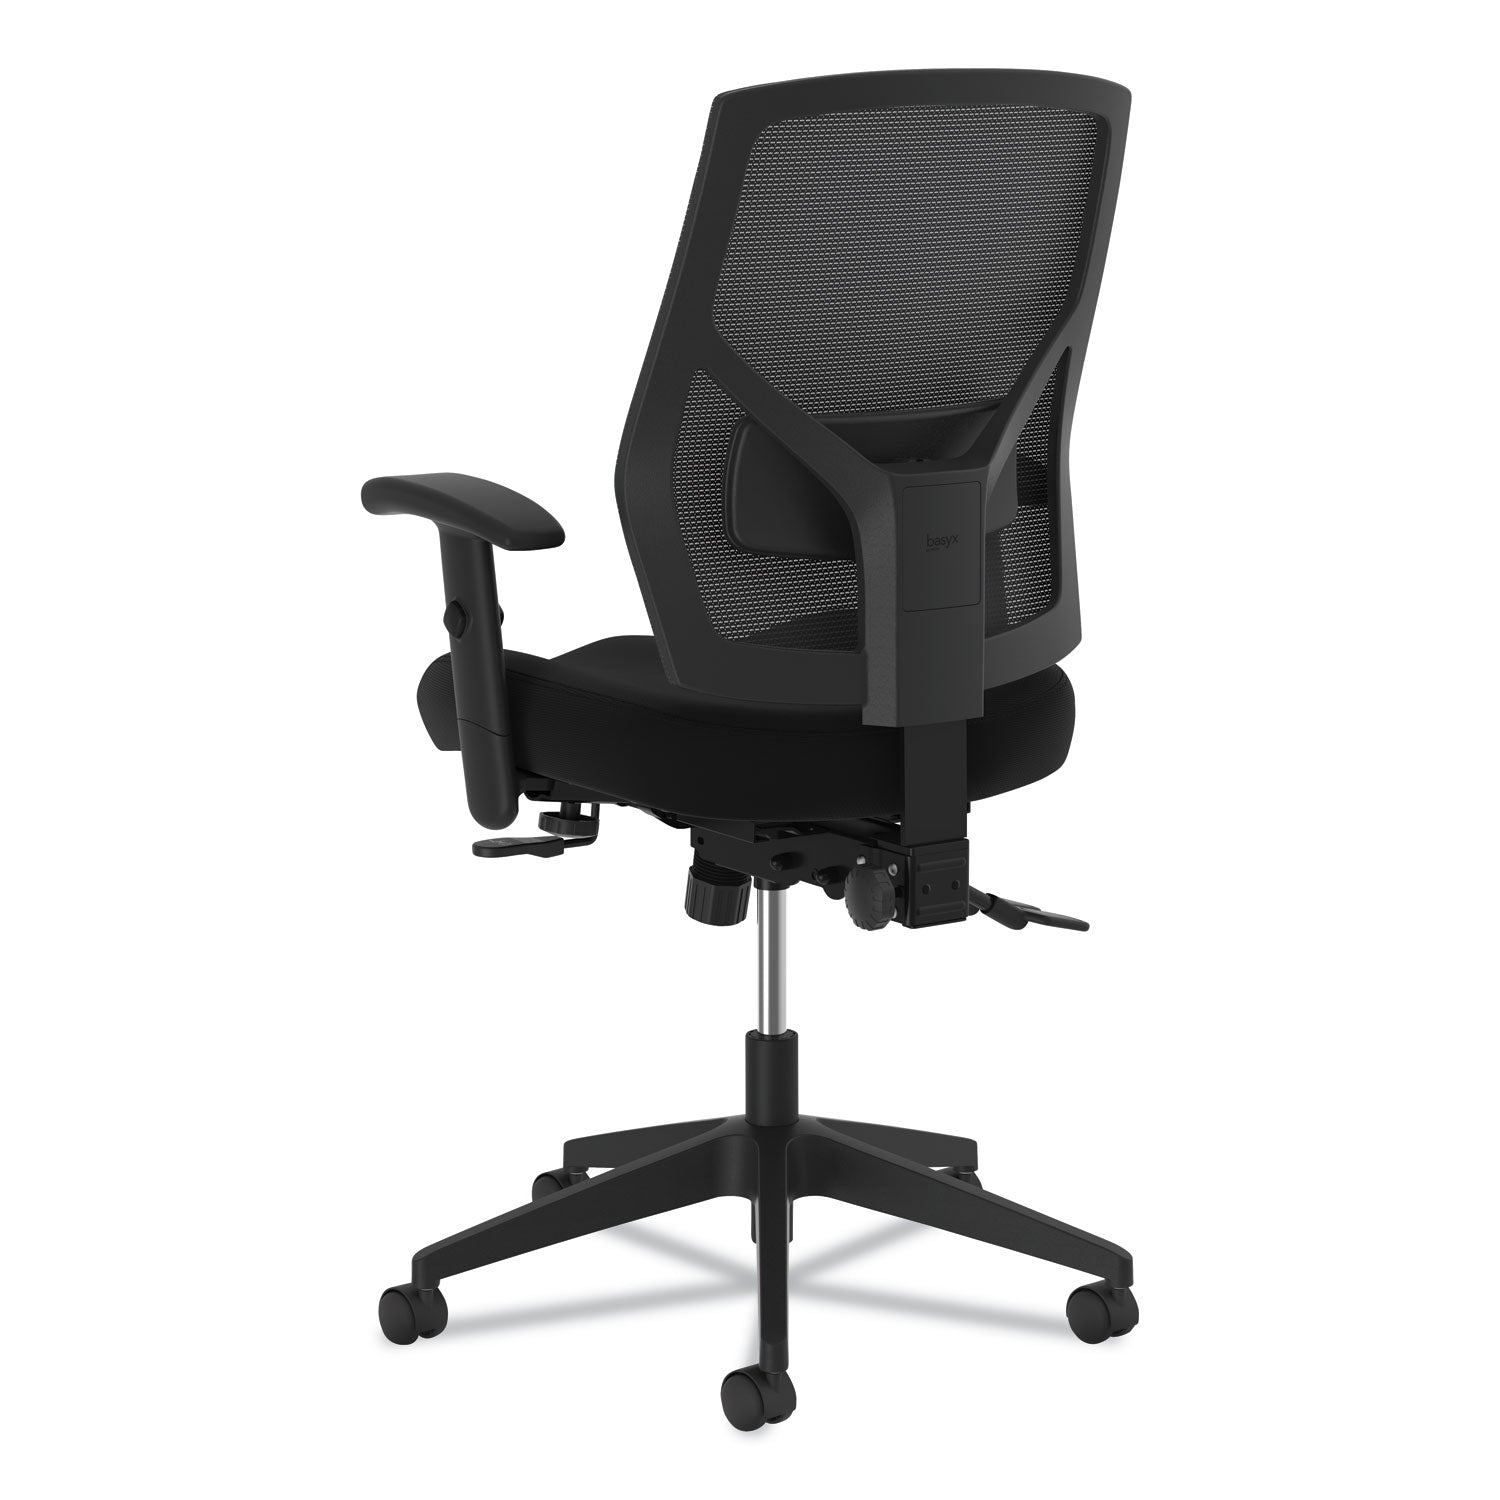 vl582-high-back-task-chair-supports-up-to-250-lb-19-to-22-seat-height-black_bsxvl582es10t - 4